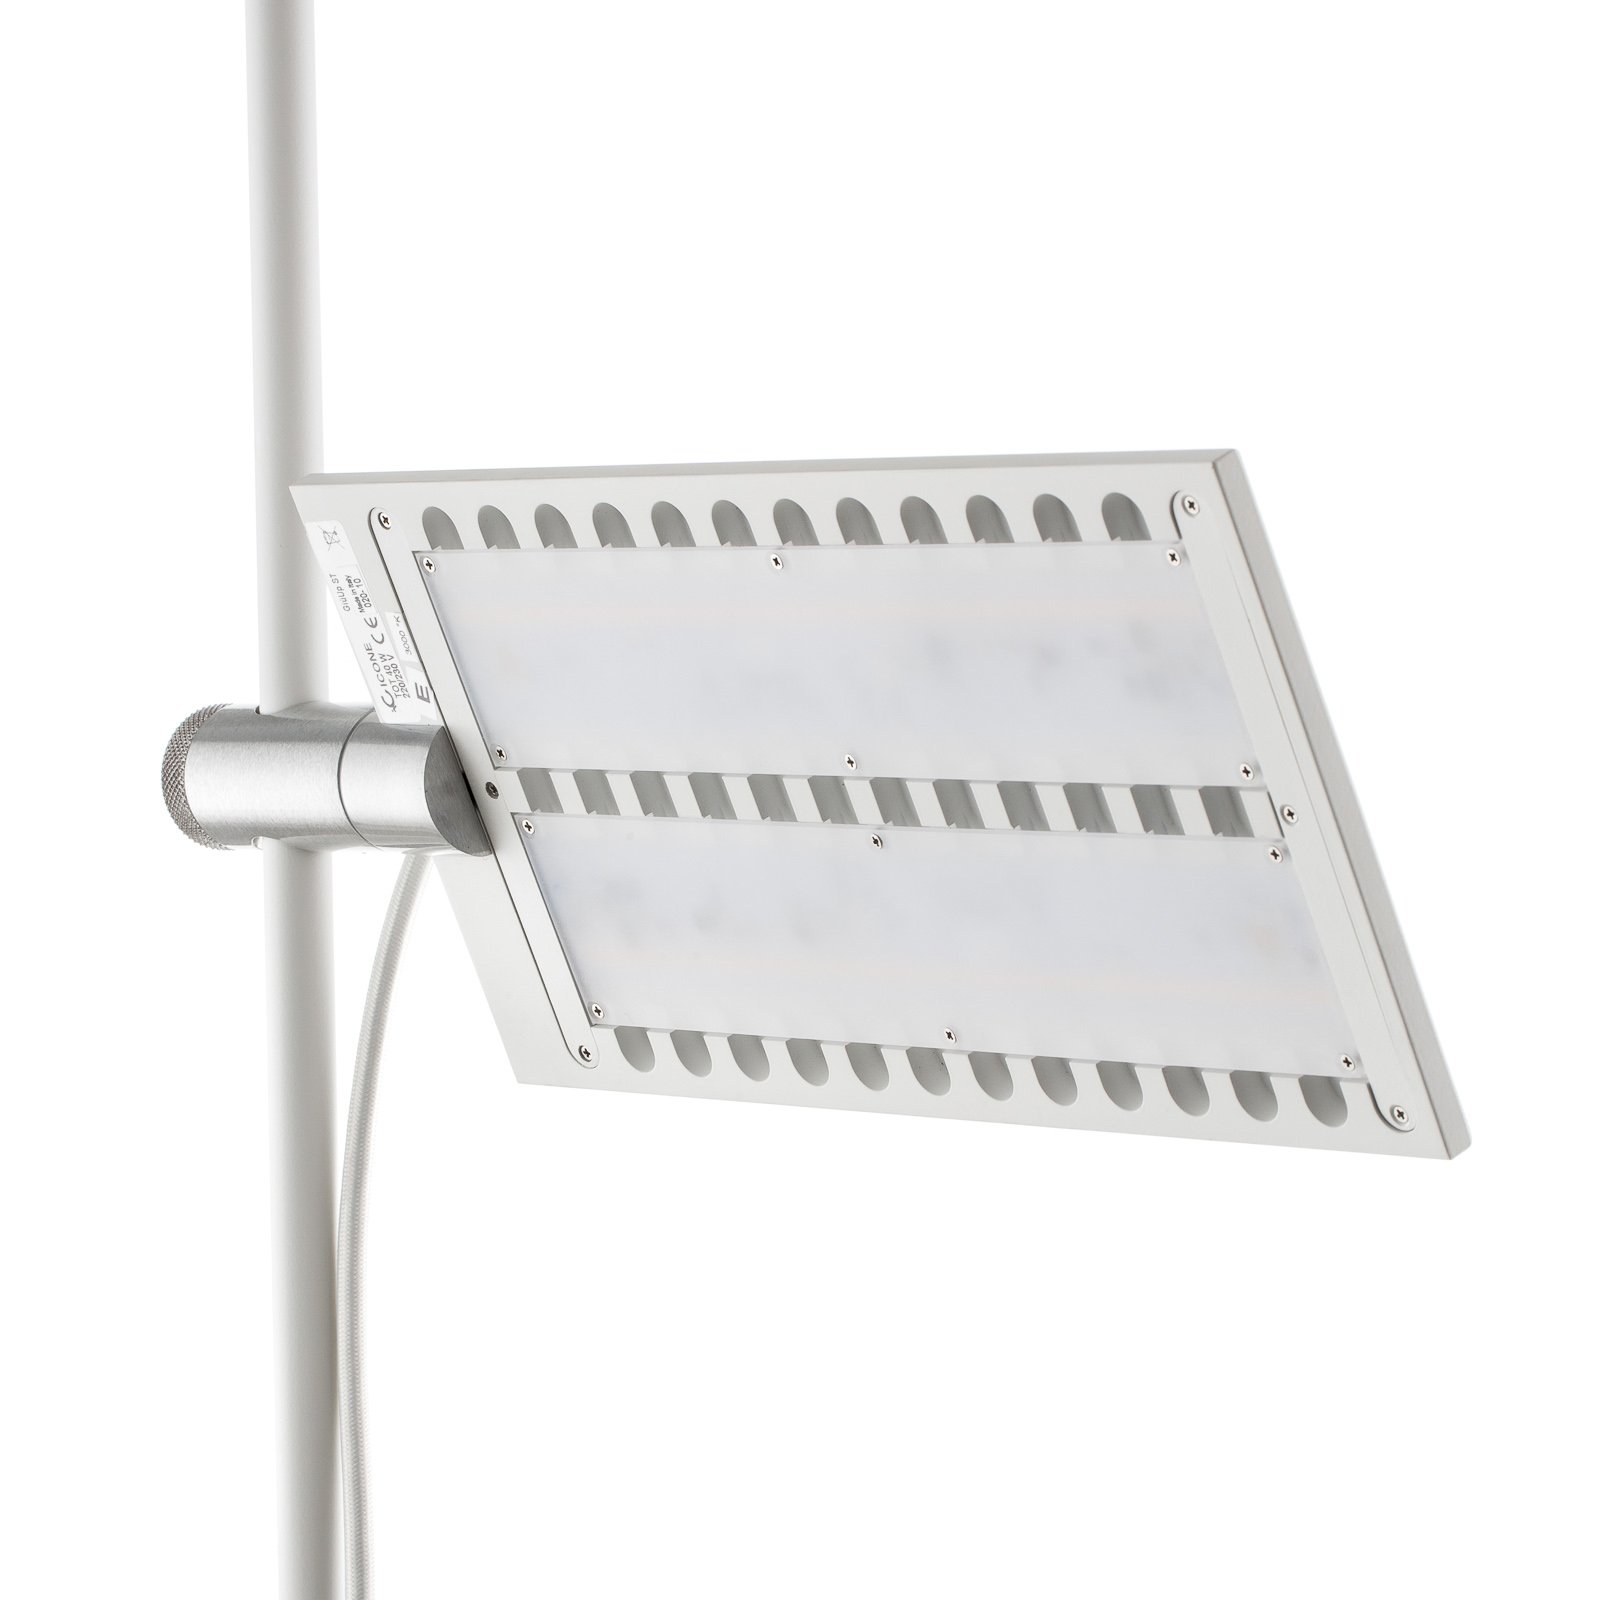 ICONE GiuUp LED uplighter, dimmable, white